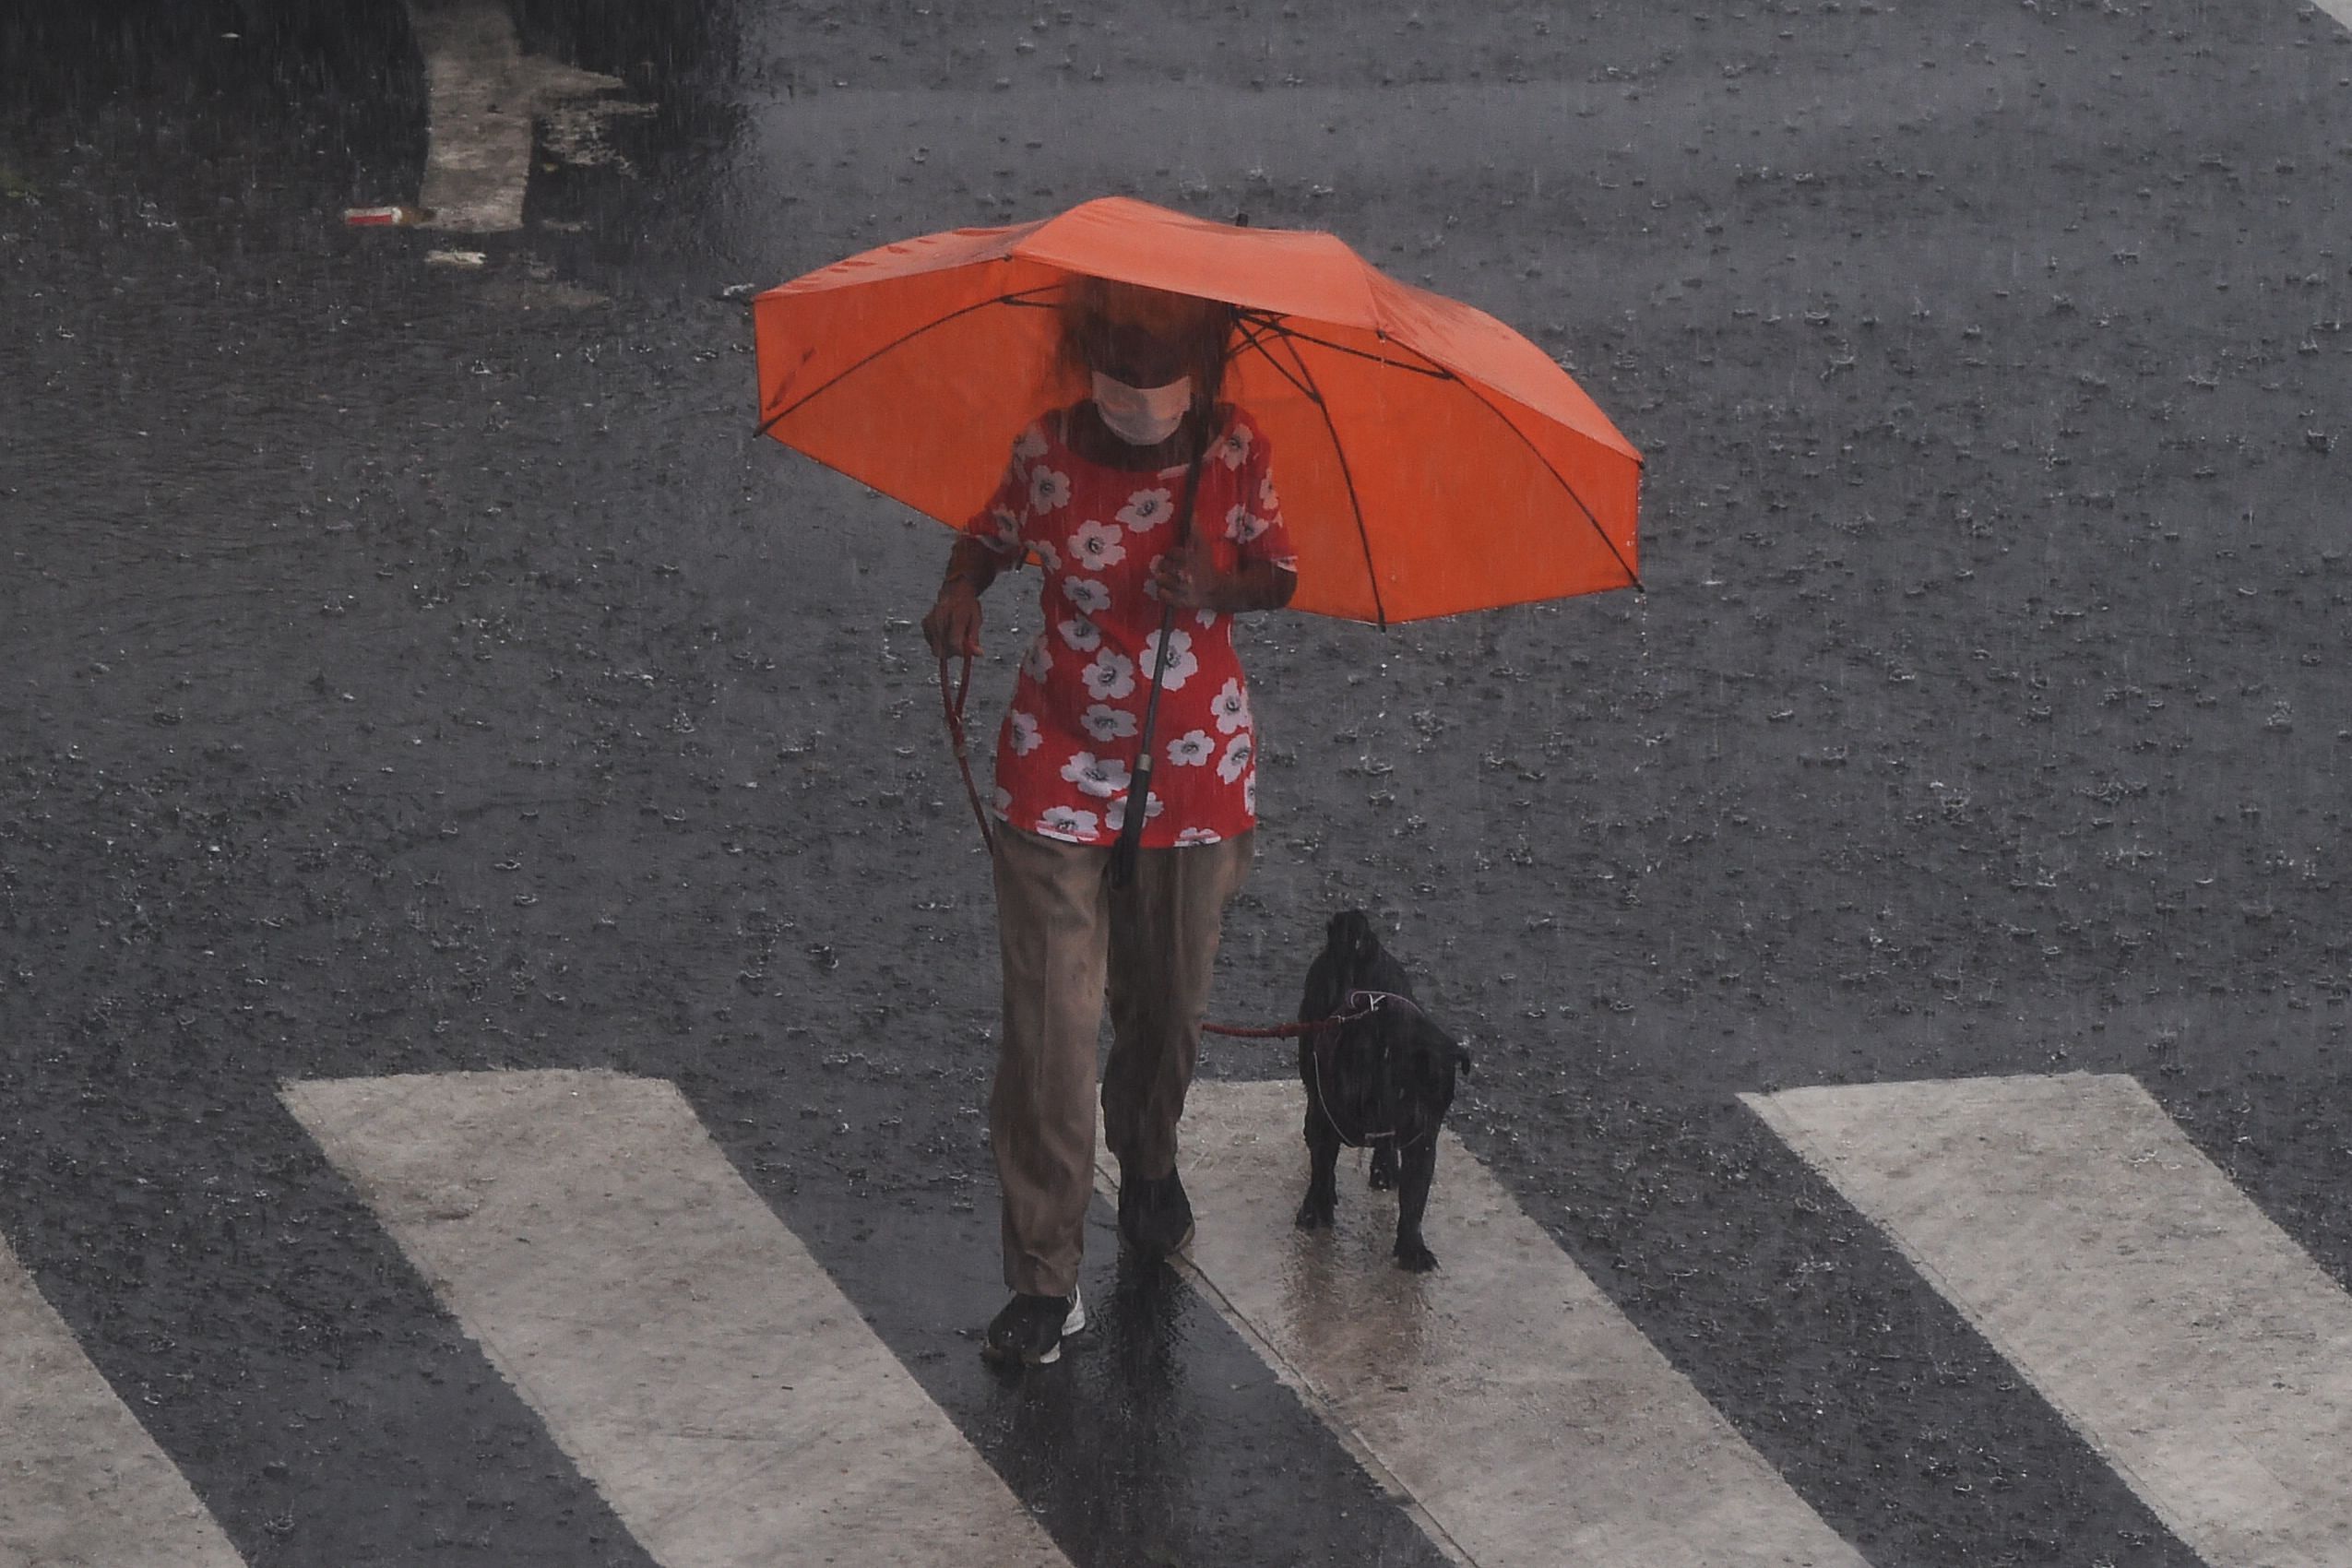 A woman walks her dog as rain falls in Mumbai on June 4, 2020, the day after cyclone Nisarga's landfall in India's western coast. Credit: AFP Photo